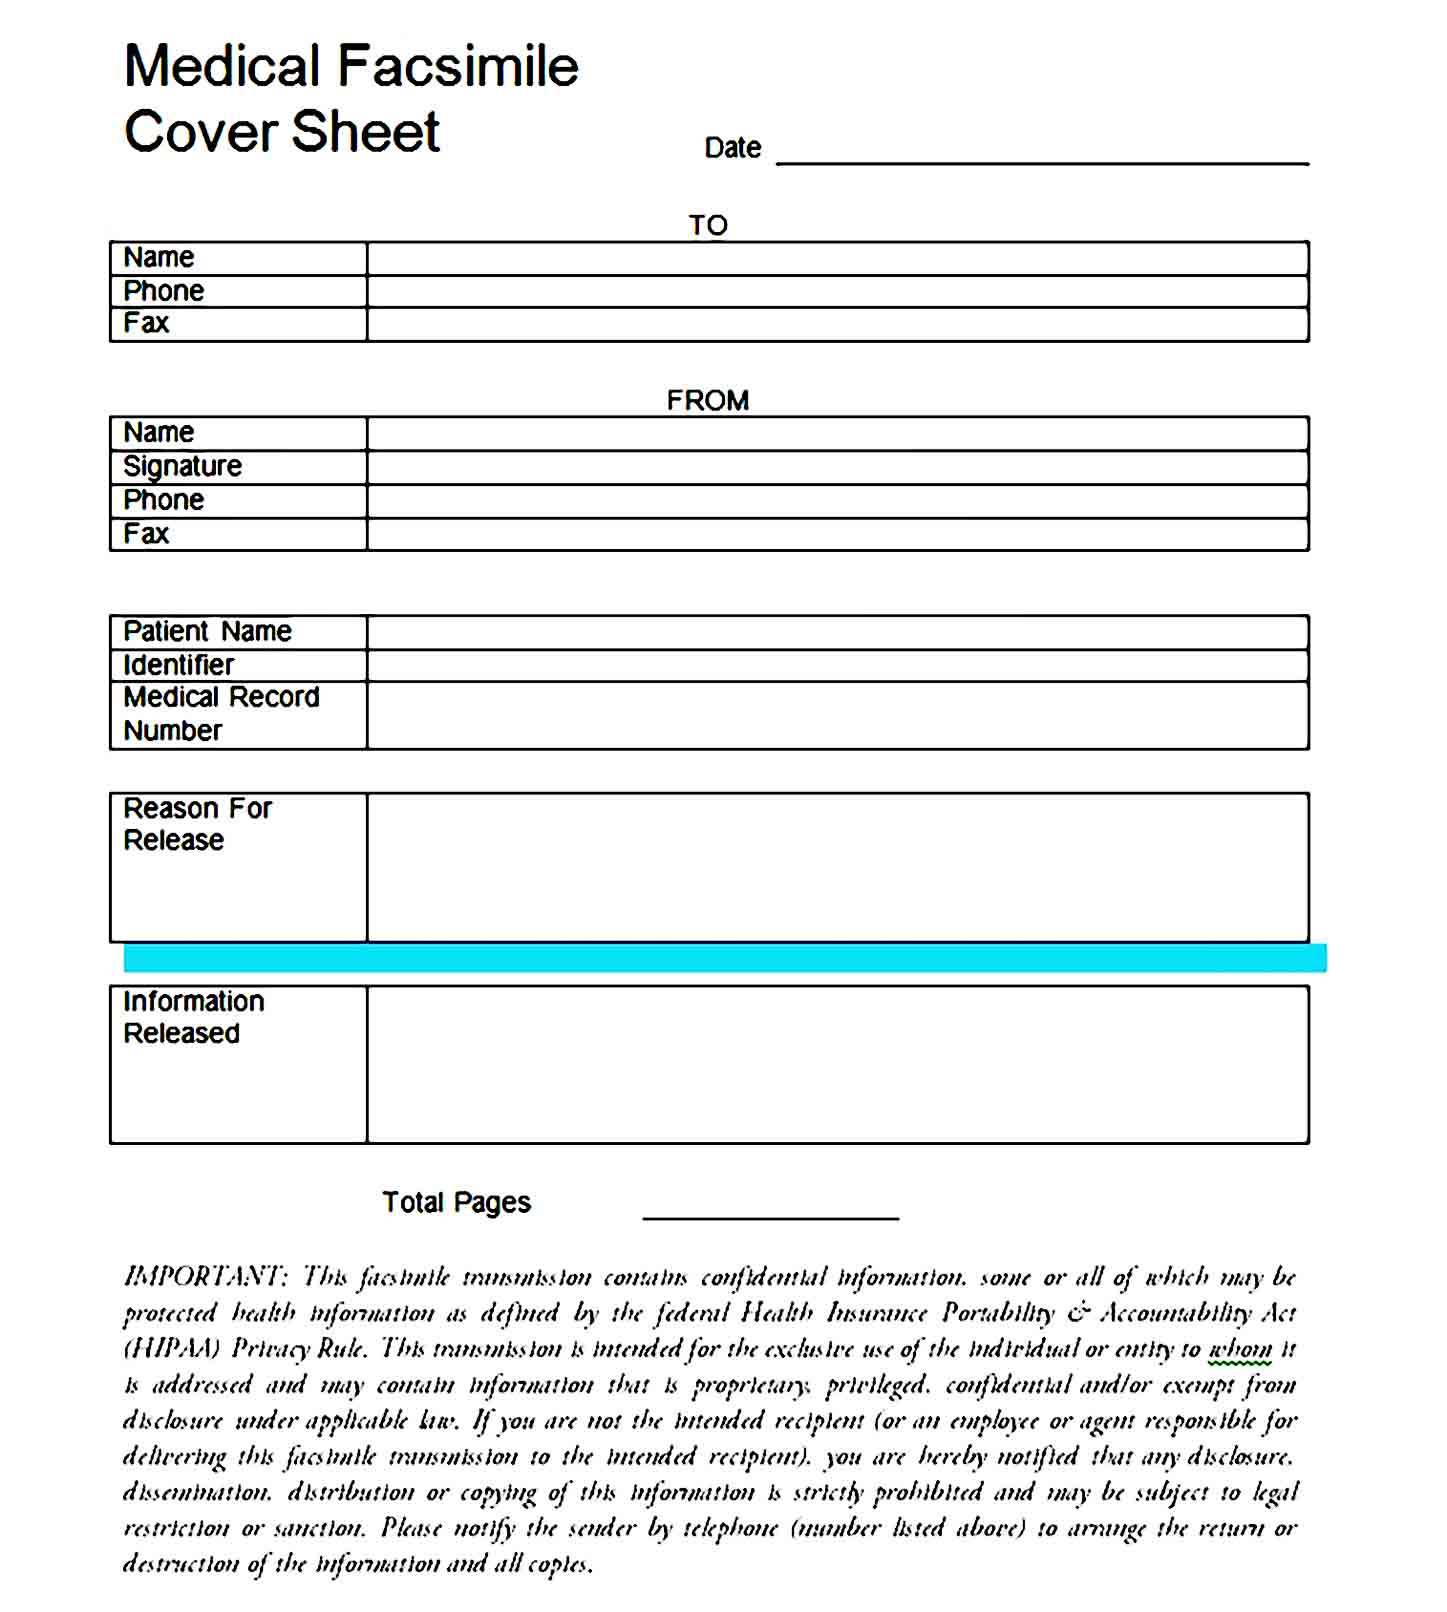 Fax Cover Sheet Template 15